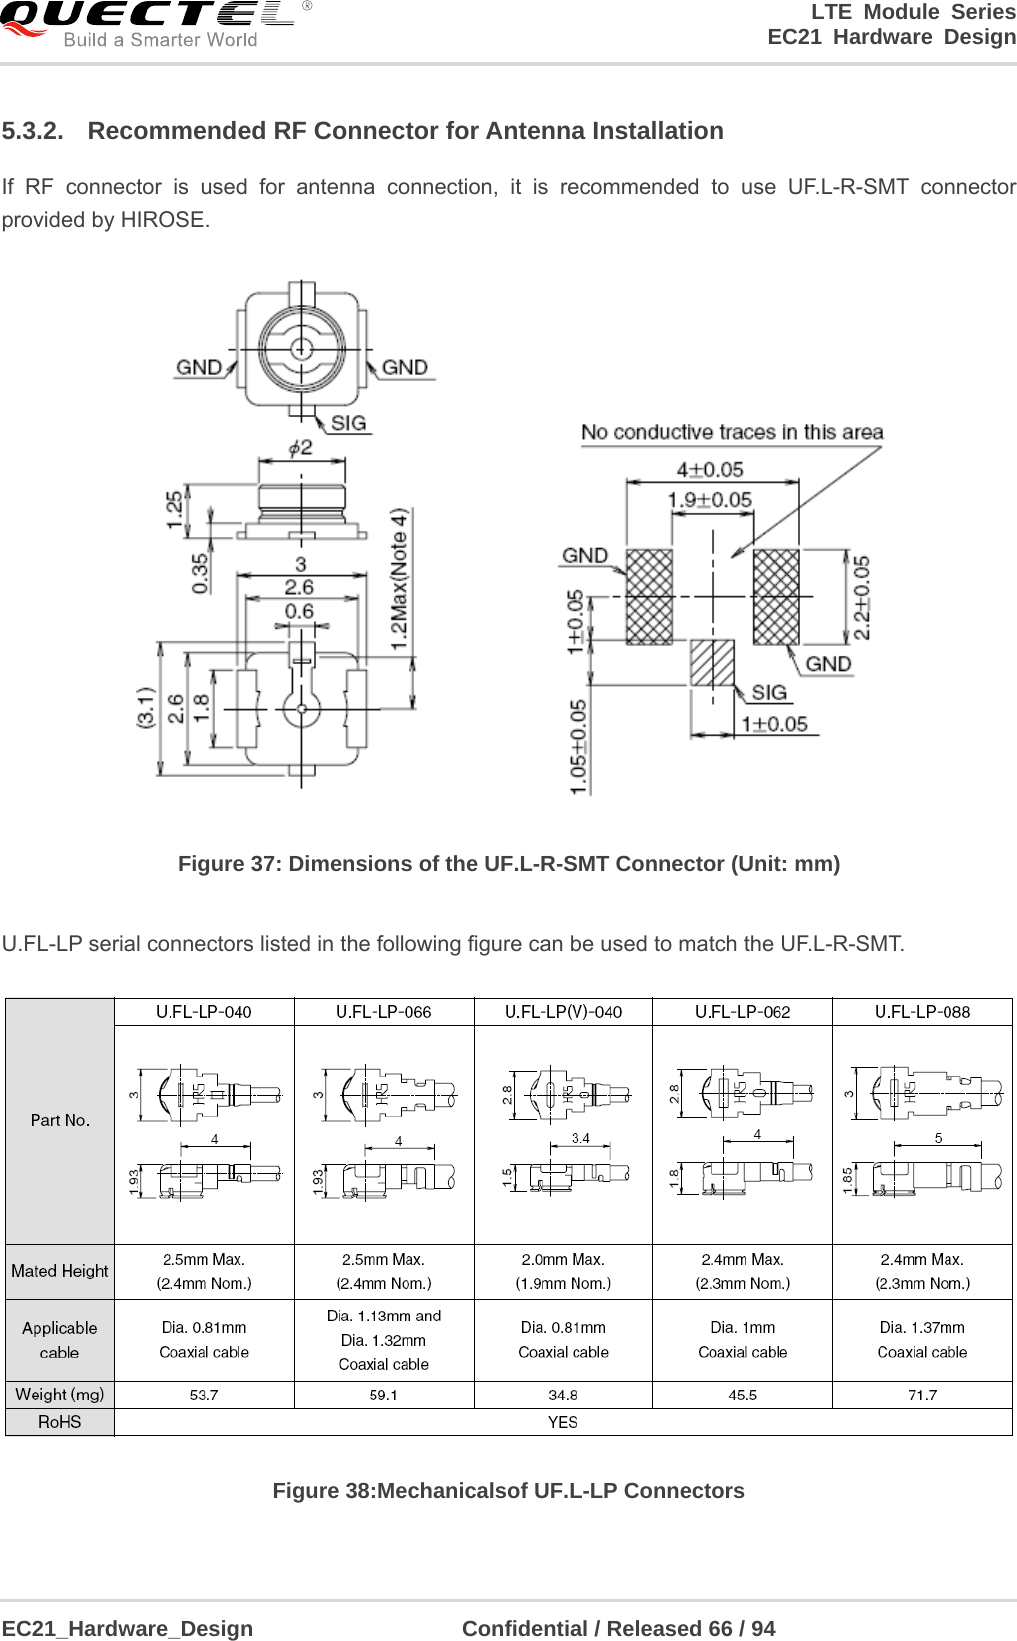 LTE Module Series                                                                 EC21 Hardware Design  EC21_Hardware_Design                   Confidential / Released 66 / 94    5.3.2.  Recommended RF Connector for Antenna Installation If RF connector is used for antenna connection, it is recommended to use UF.L-R-SMT connector provided by HIROSE.    Figure 37: Dimensions of the UF.L-R-SMT Connector (Unit: mm)  U.FL-LP serial connectors listed in the following figure can be used to match the UF.L-R-SMT.  Figure 38:Mechanicalsof UF.L-LP Connectors  